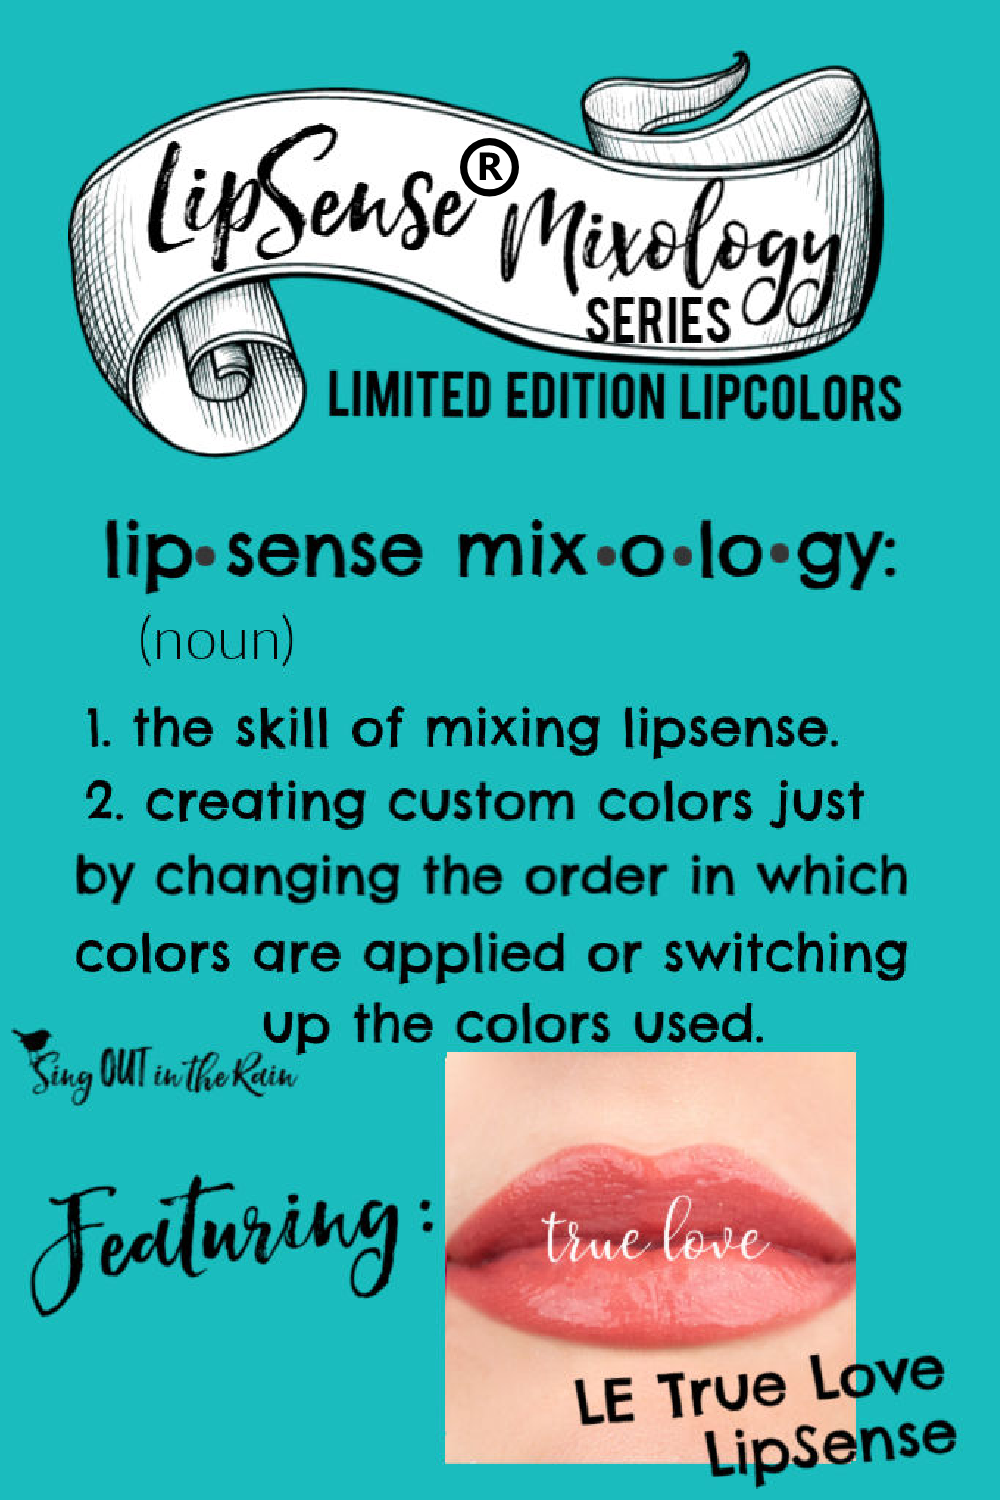 The Ultimate Guide to True Love LipSense Mixology